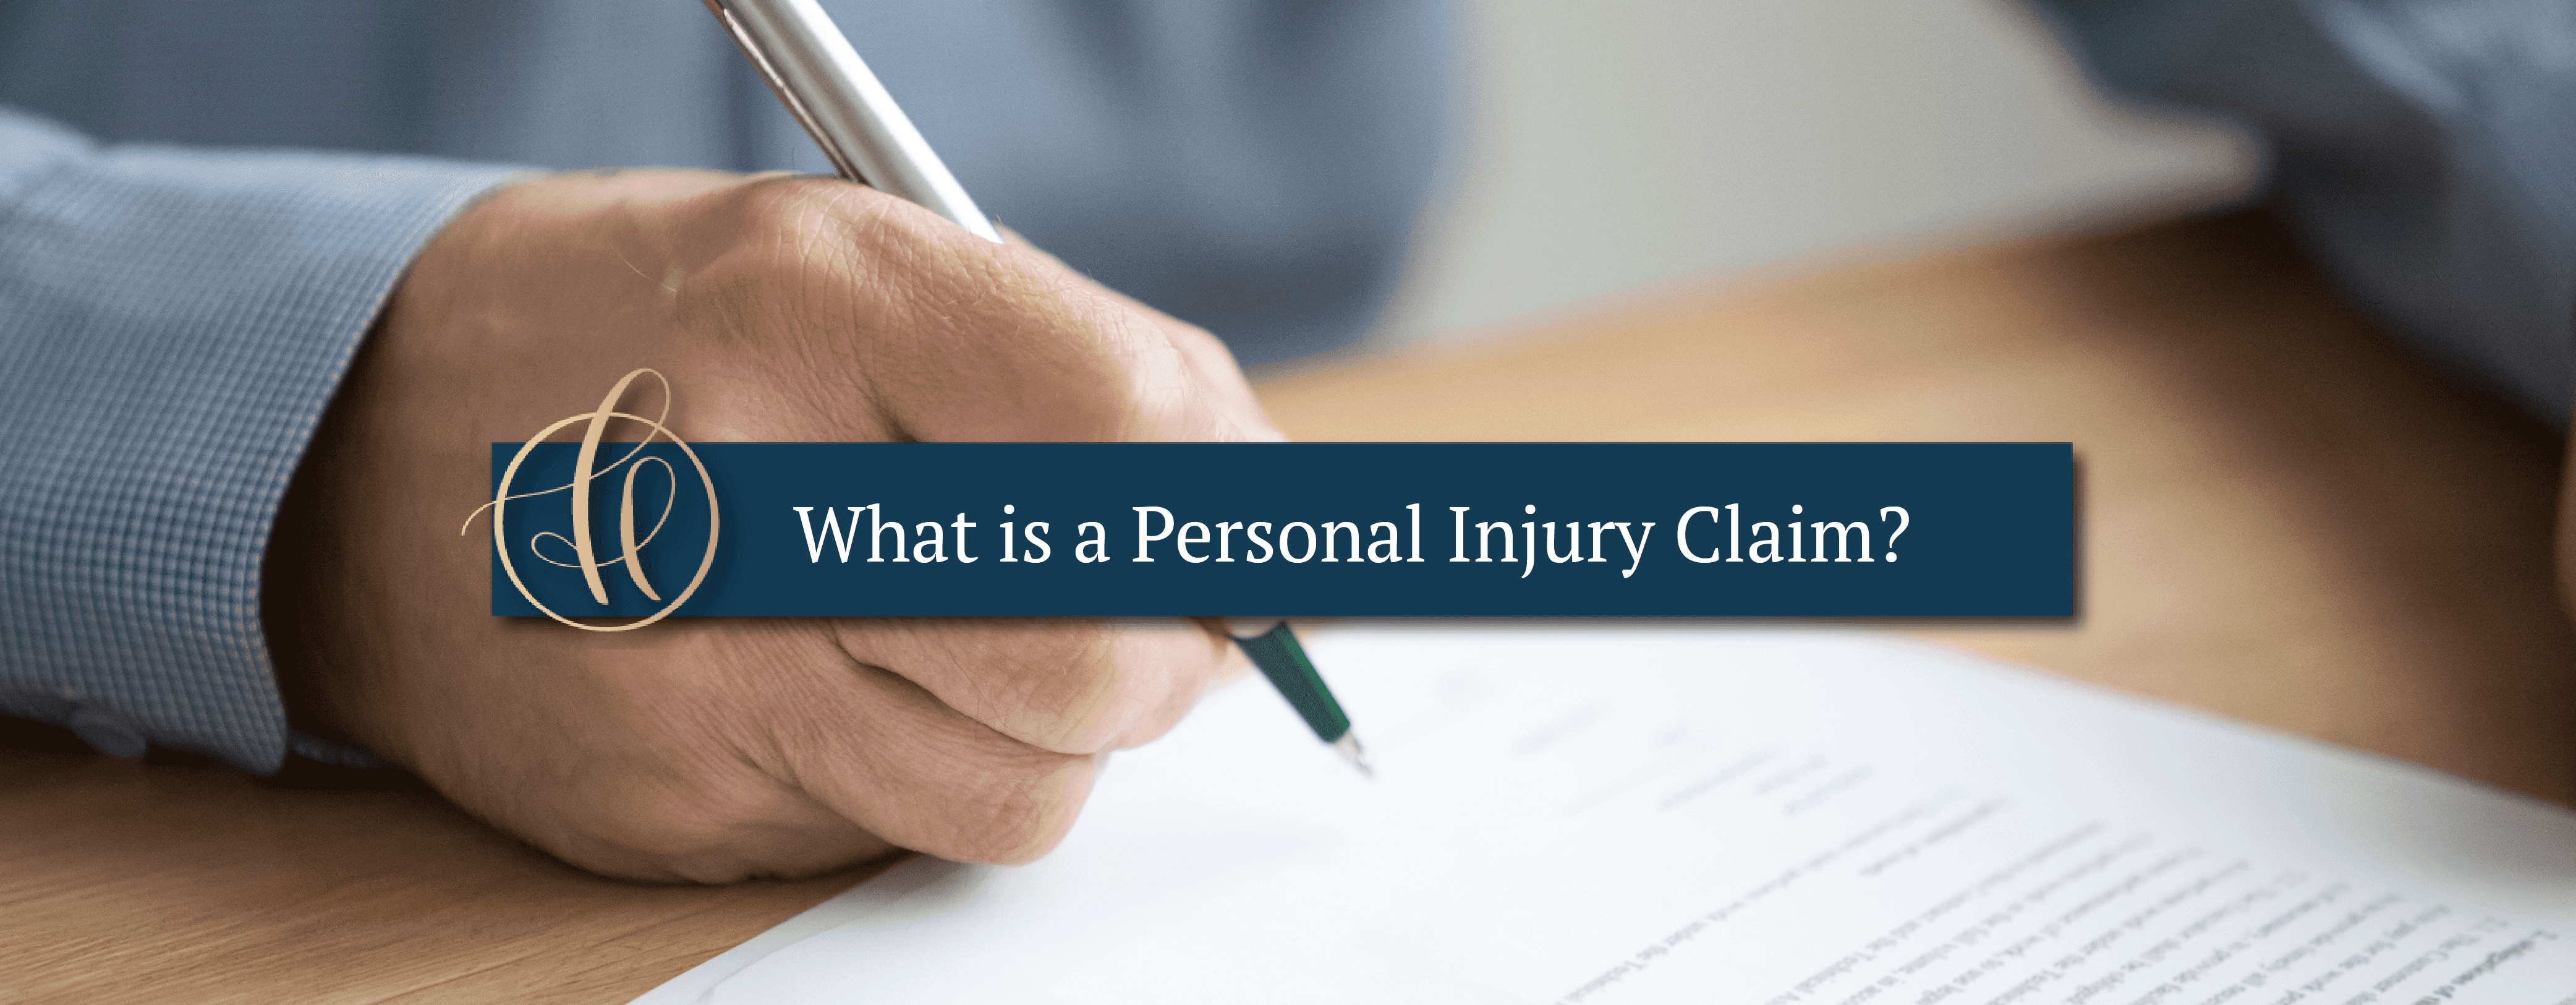 What is a Personal Injury Claim?￼